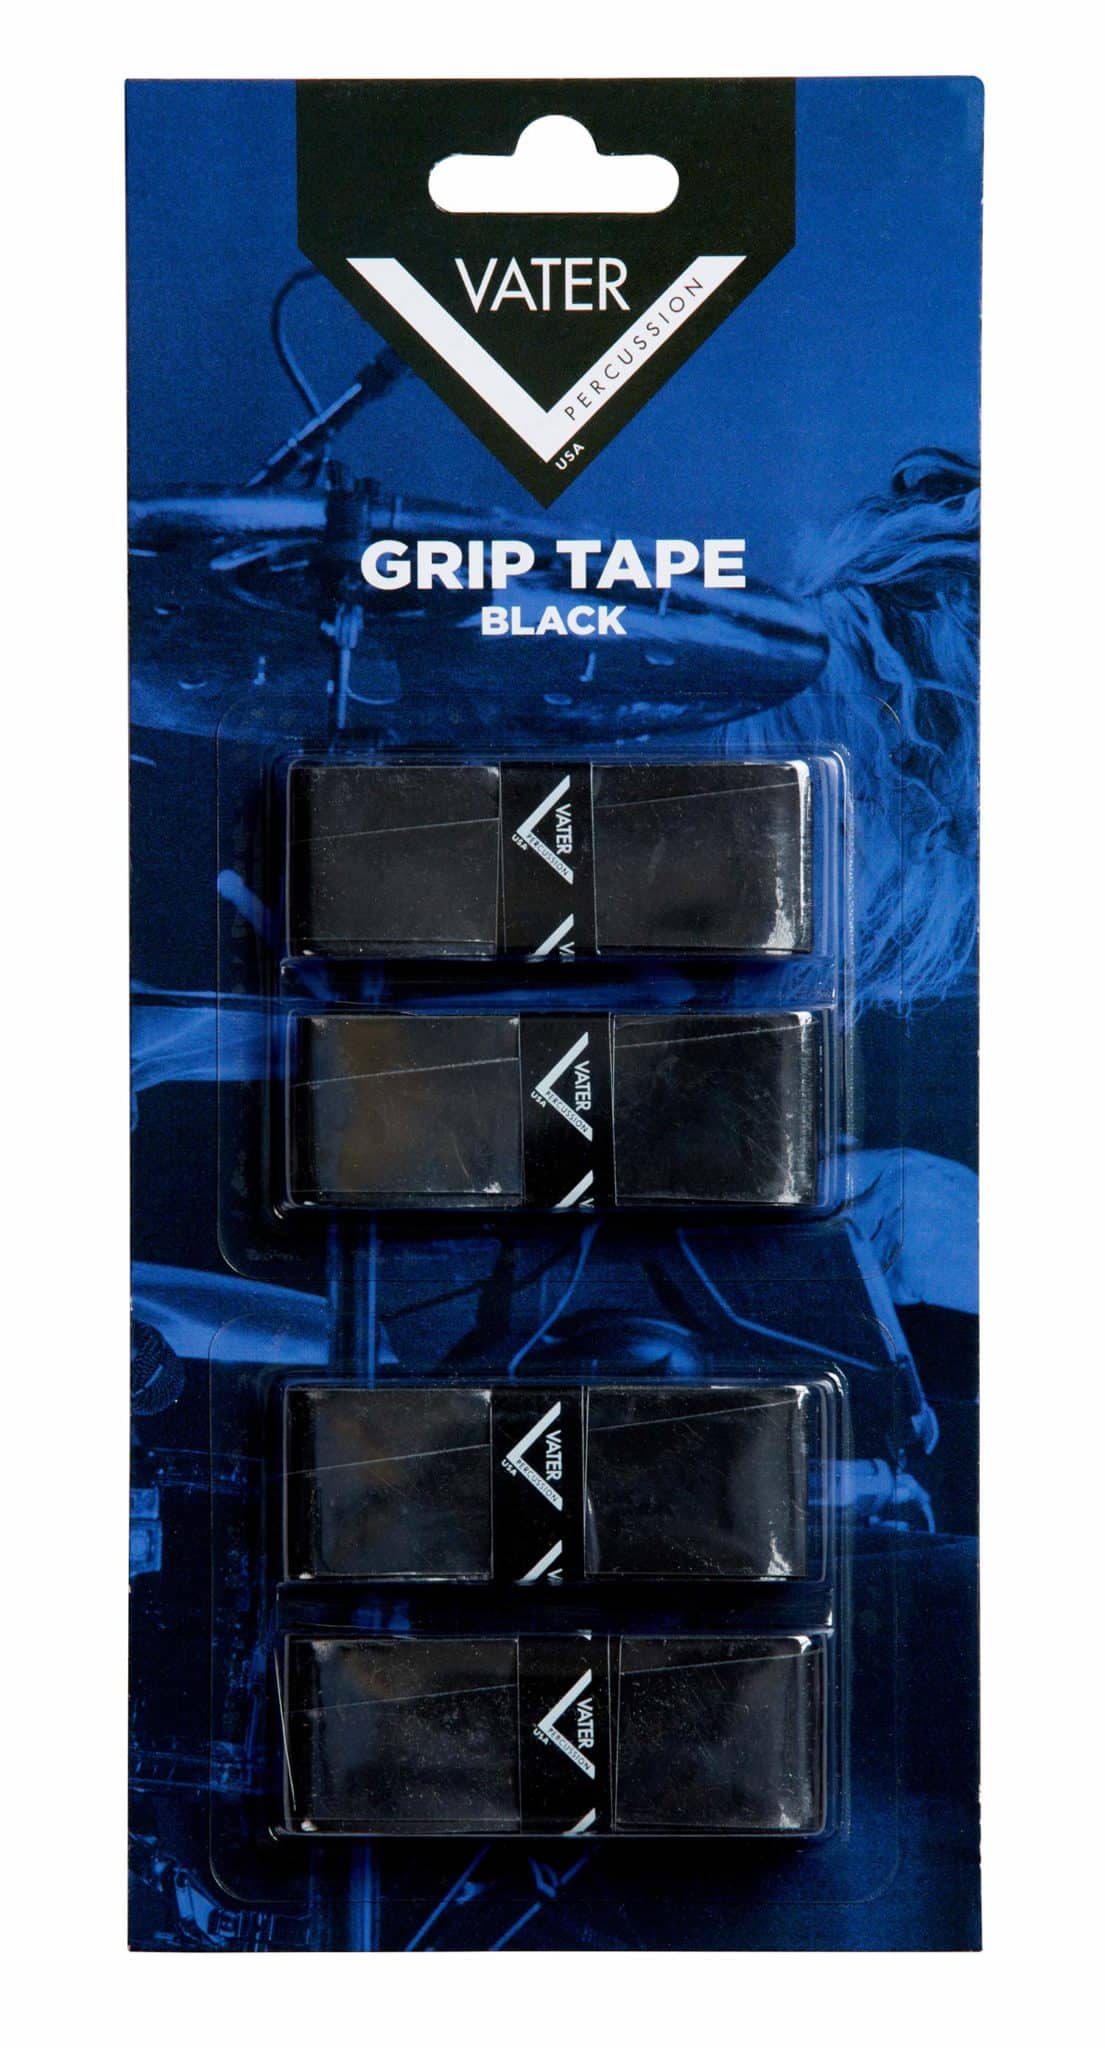 An image of Vater Grip Tape Black